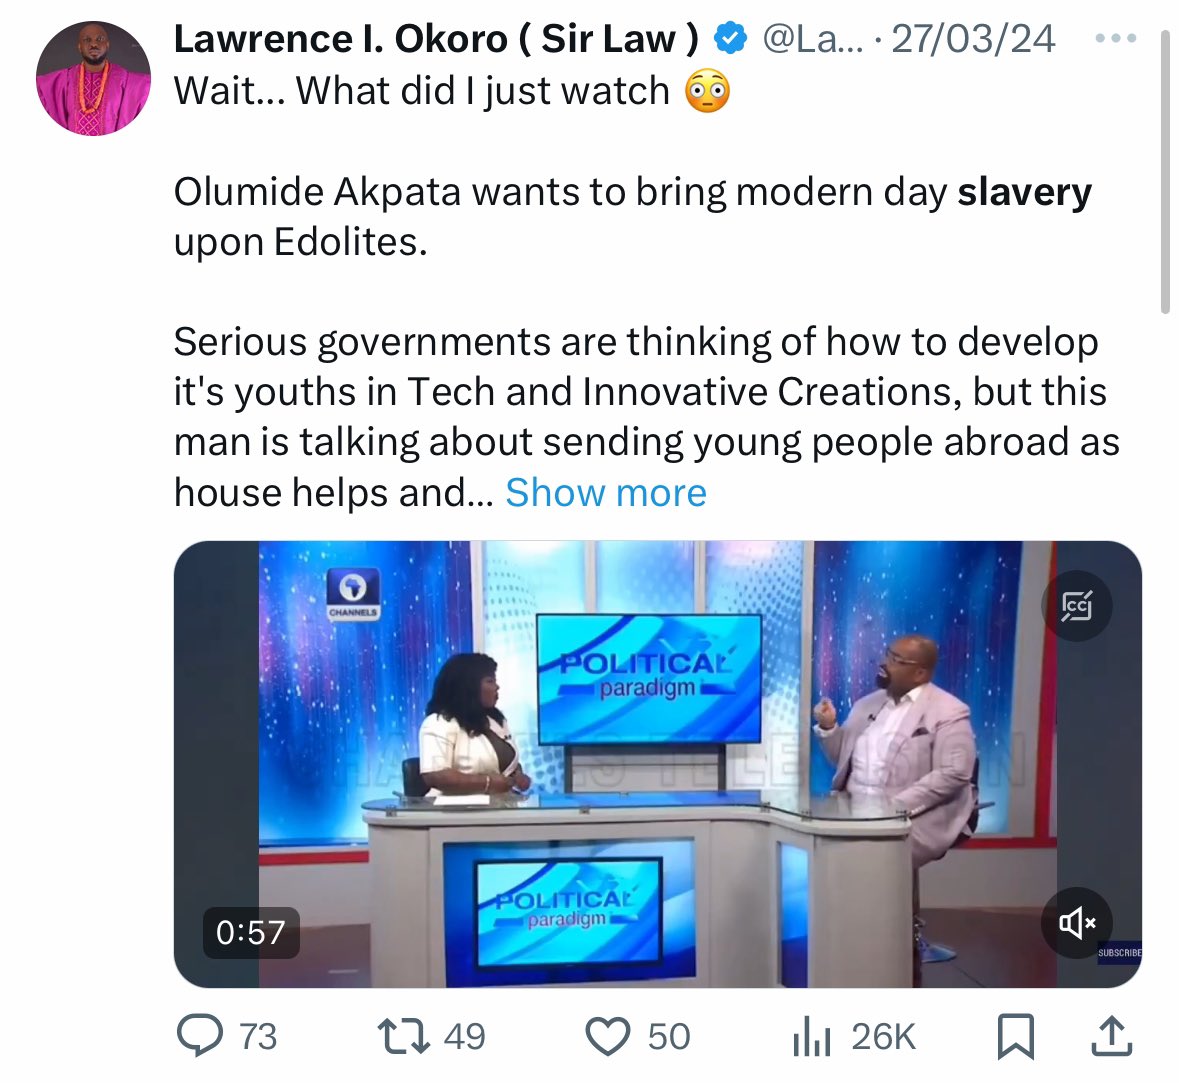 @LawrenceOkoroPG When you jones again, you post am again! Out of context, sell your candidate come hard 🤣